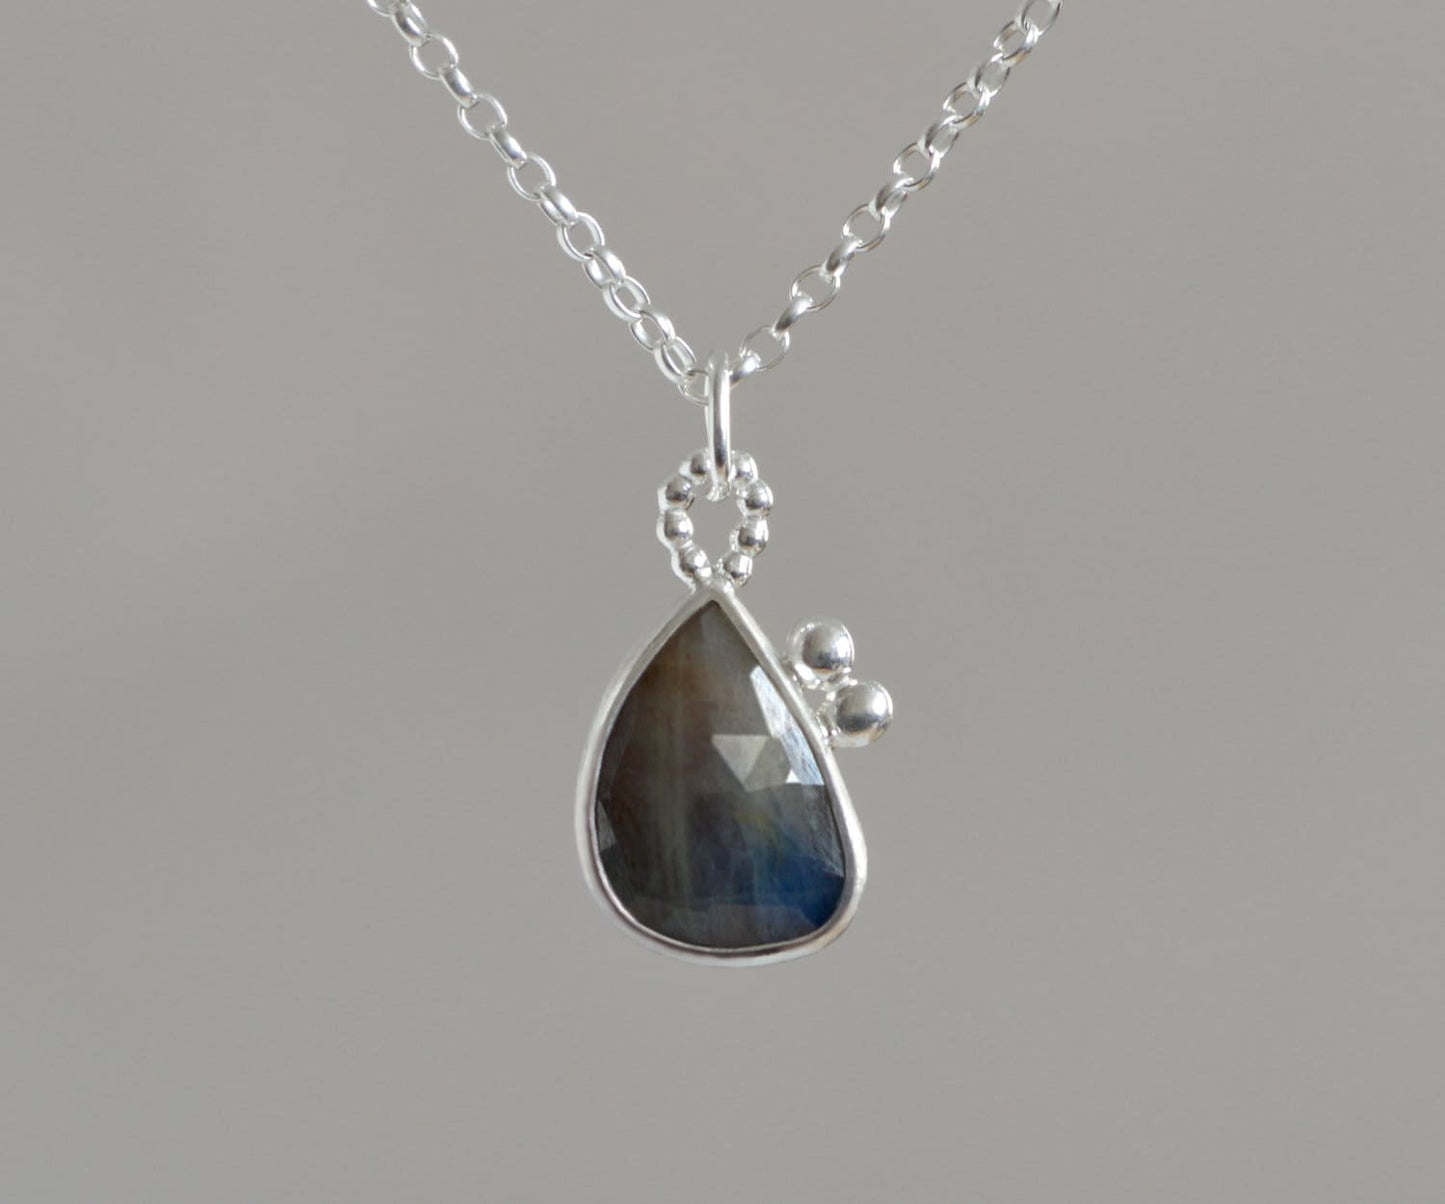 Sapphire Necklace in Sterling Silver, 4.15ct Sapphire Necklace